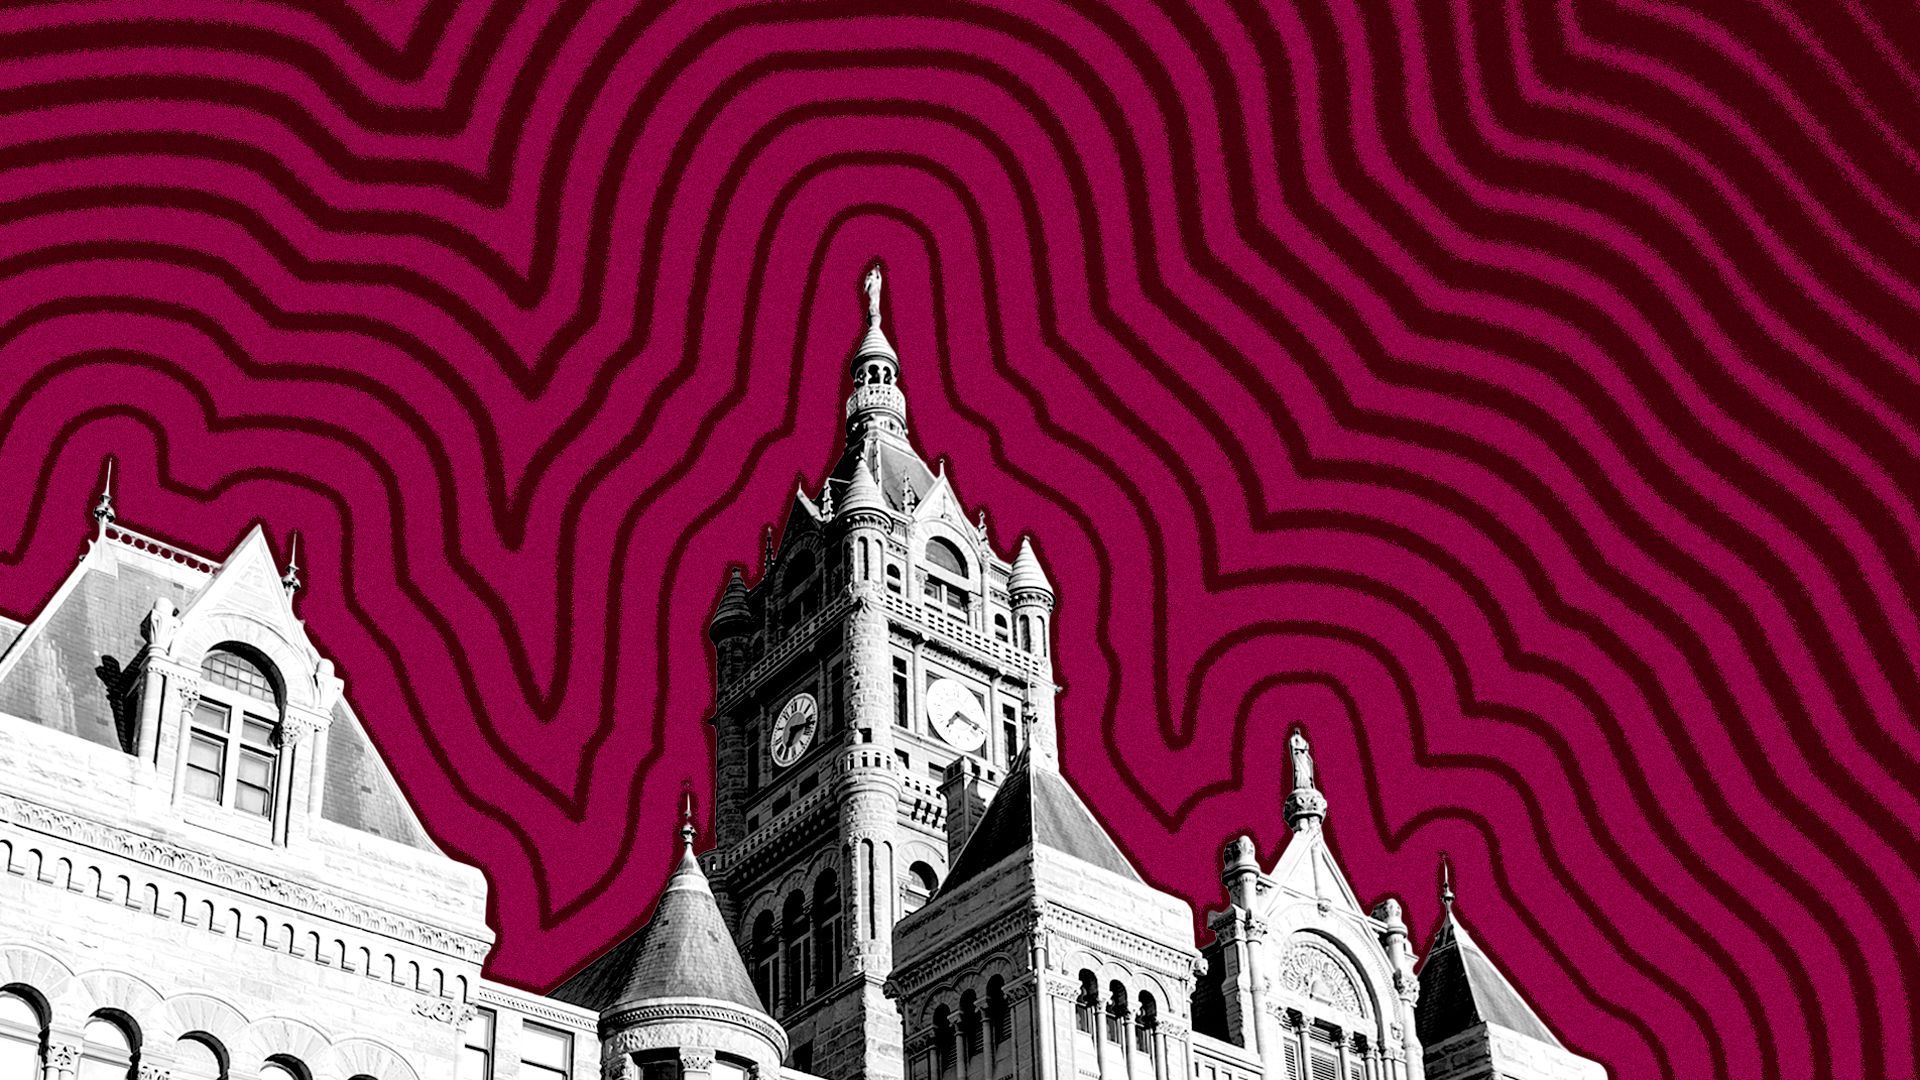 Illustration of the Salt Lake City & County Building with lines radiating from it.